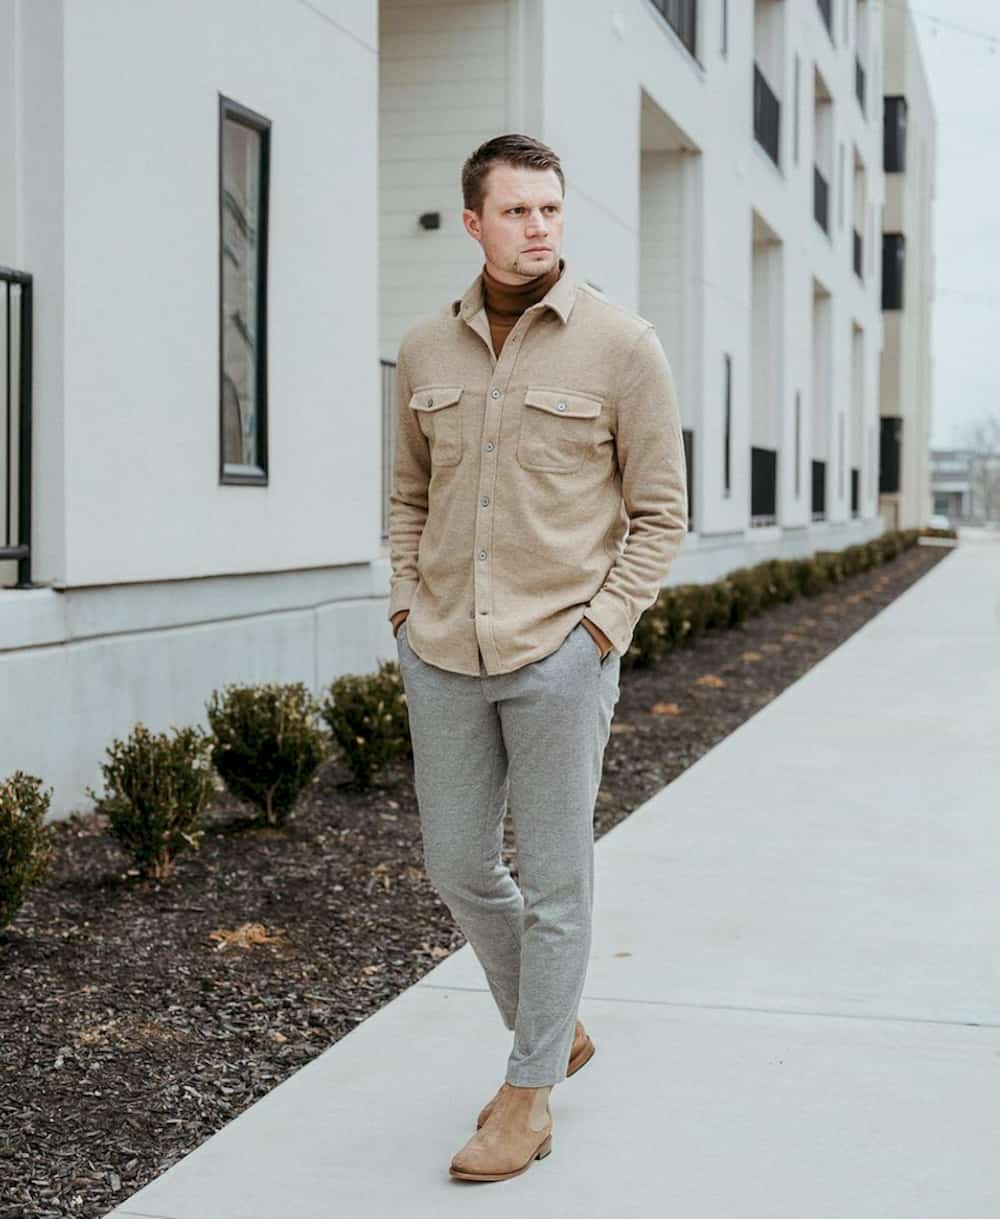 image of a man wearing a beige fleece shirt, grey pants, and brown boots